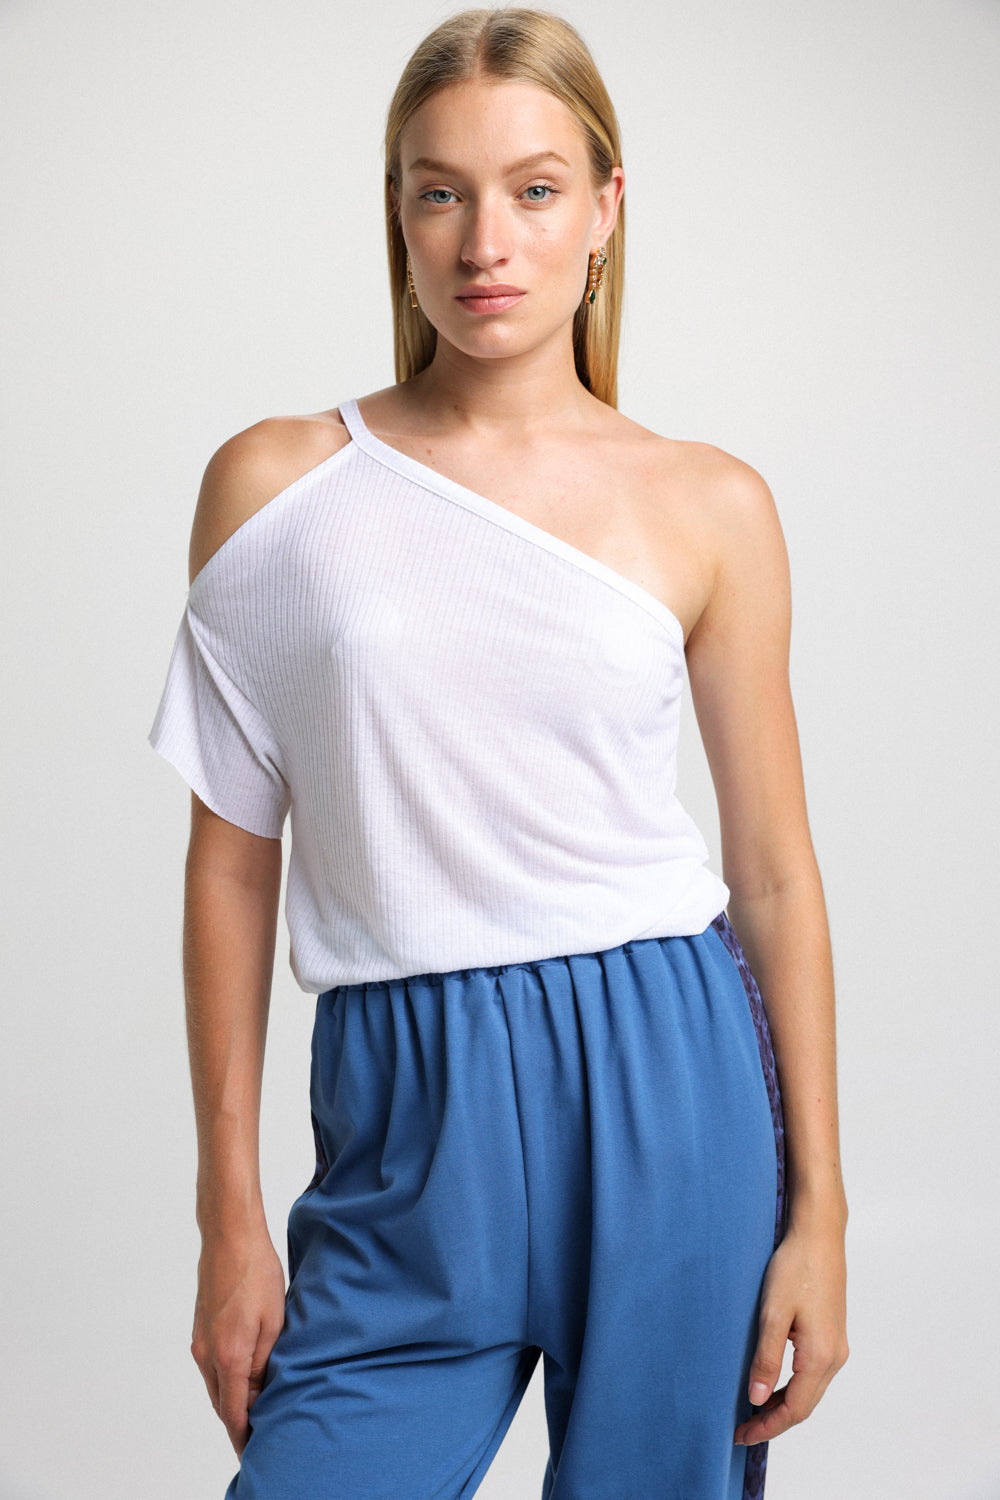 Now White One Shoulder Top